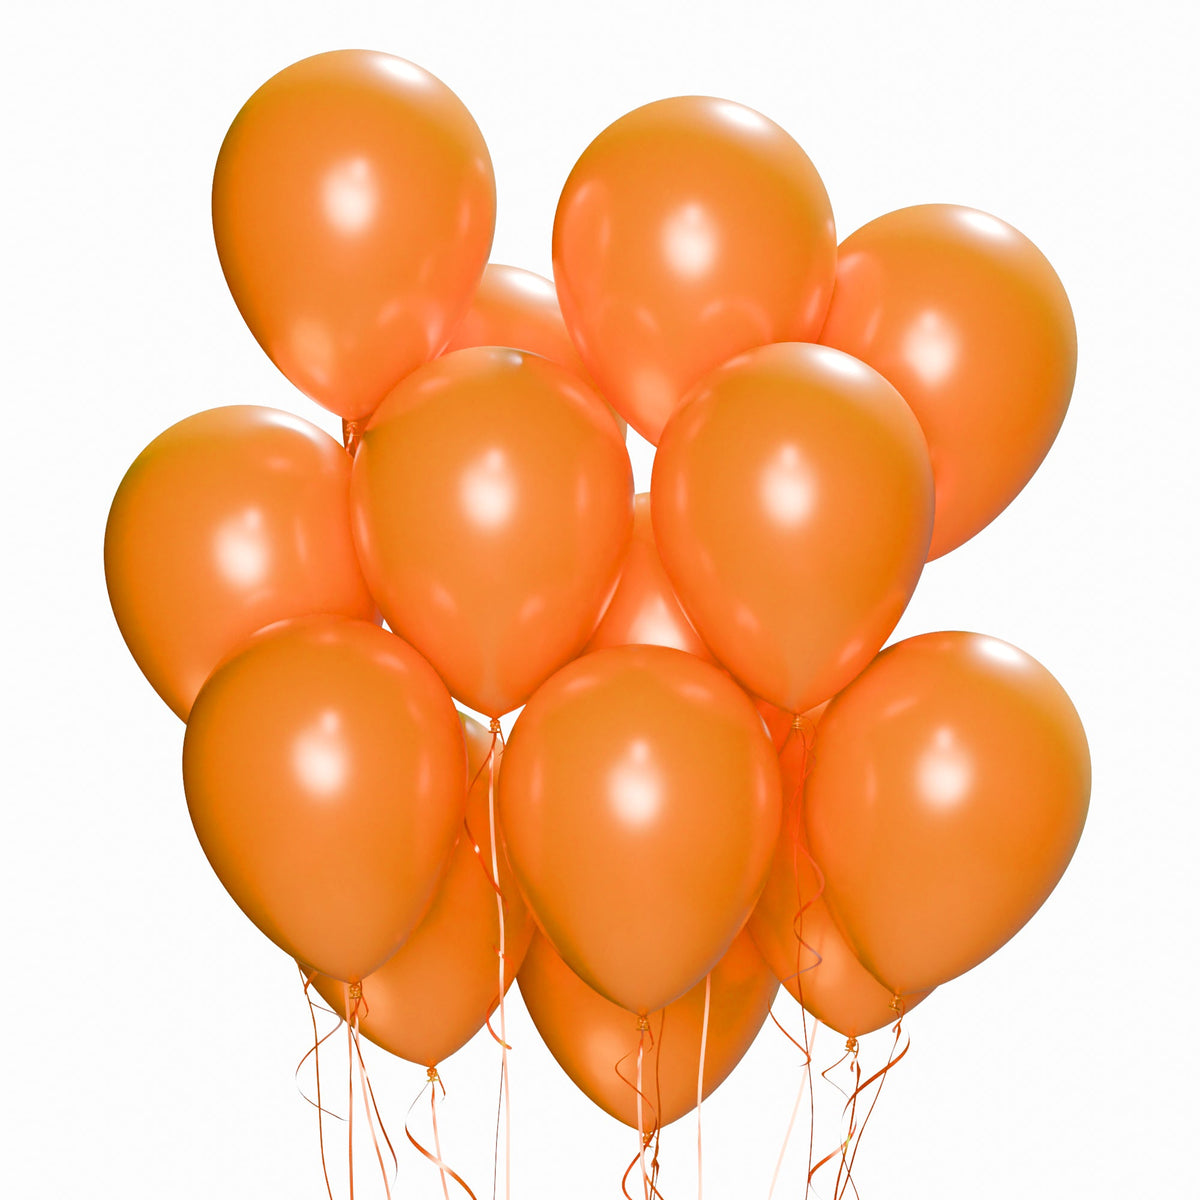 WIDE OCEAN INTERNATIONAL TRADE BEIJING CO., LTD Balloons Orange Latex Balloon 12 Inches, Pearl Collection, 15 Count 810064197574